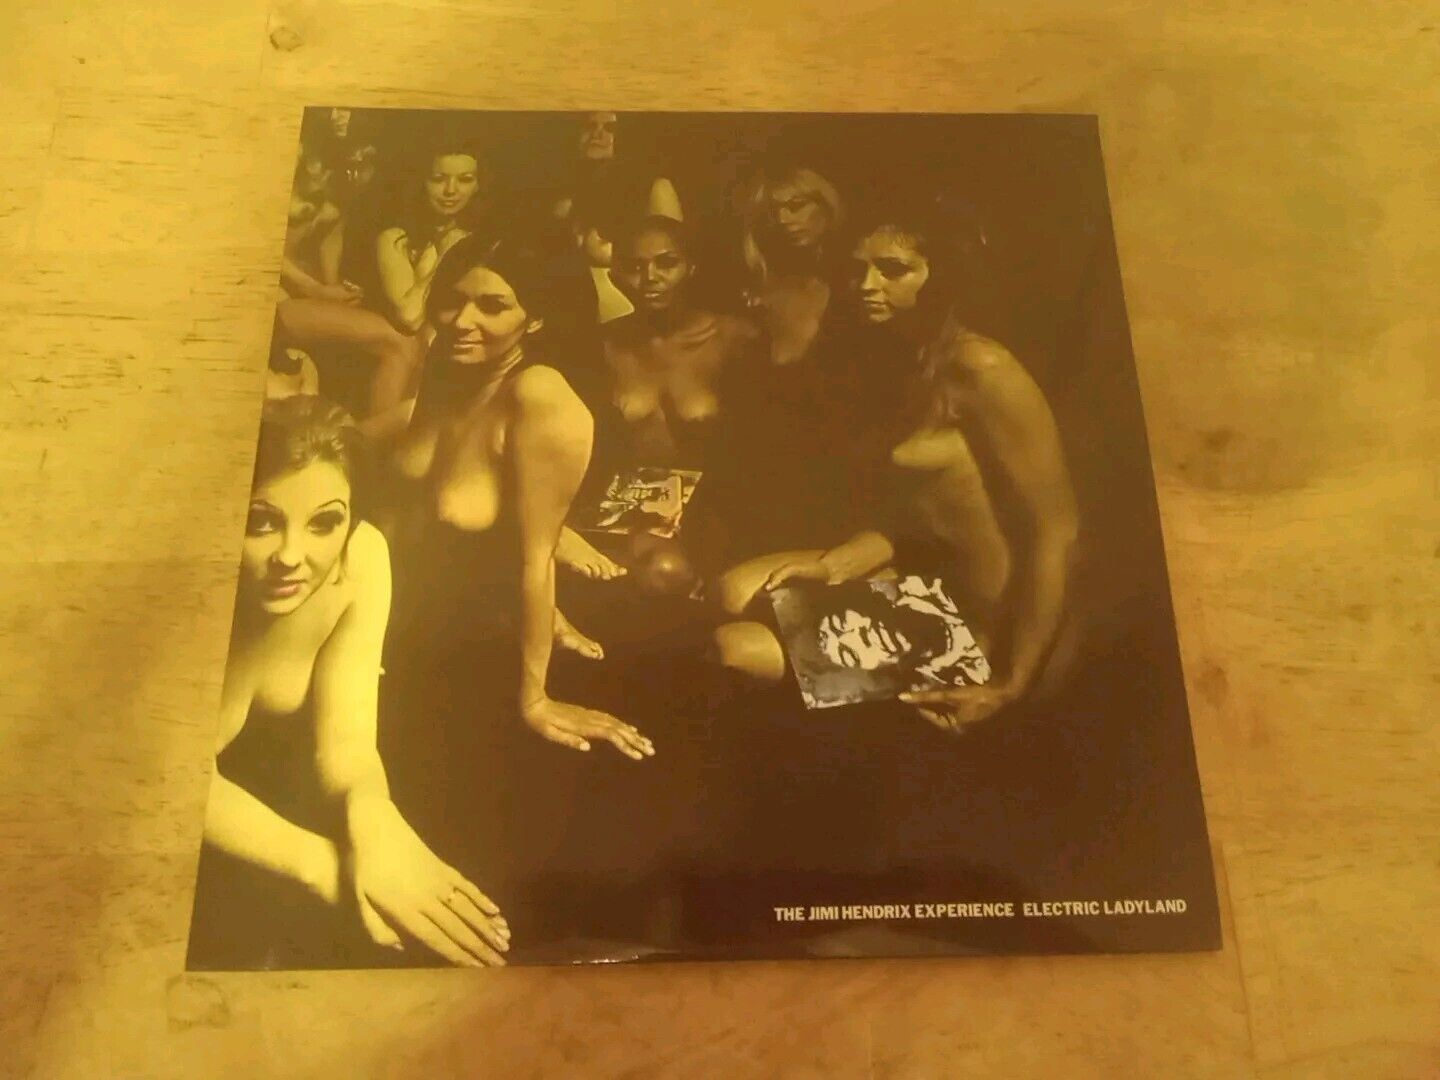 The Jimi Hendrix Experience Electric Ladyland 613008 A1 B1 RMF05-,  Grey ,Mint